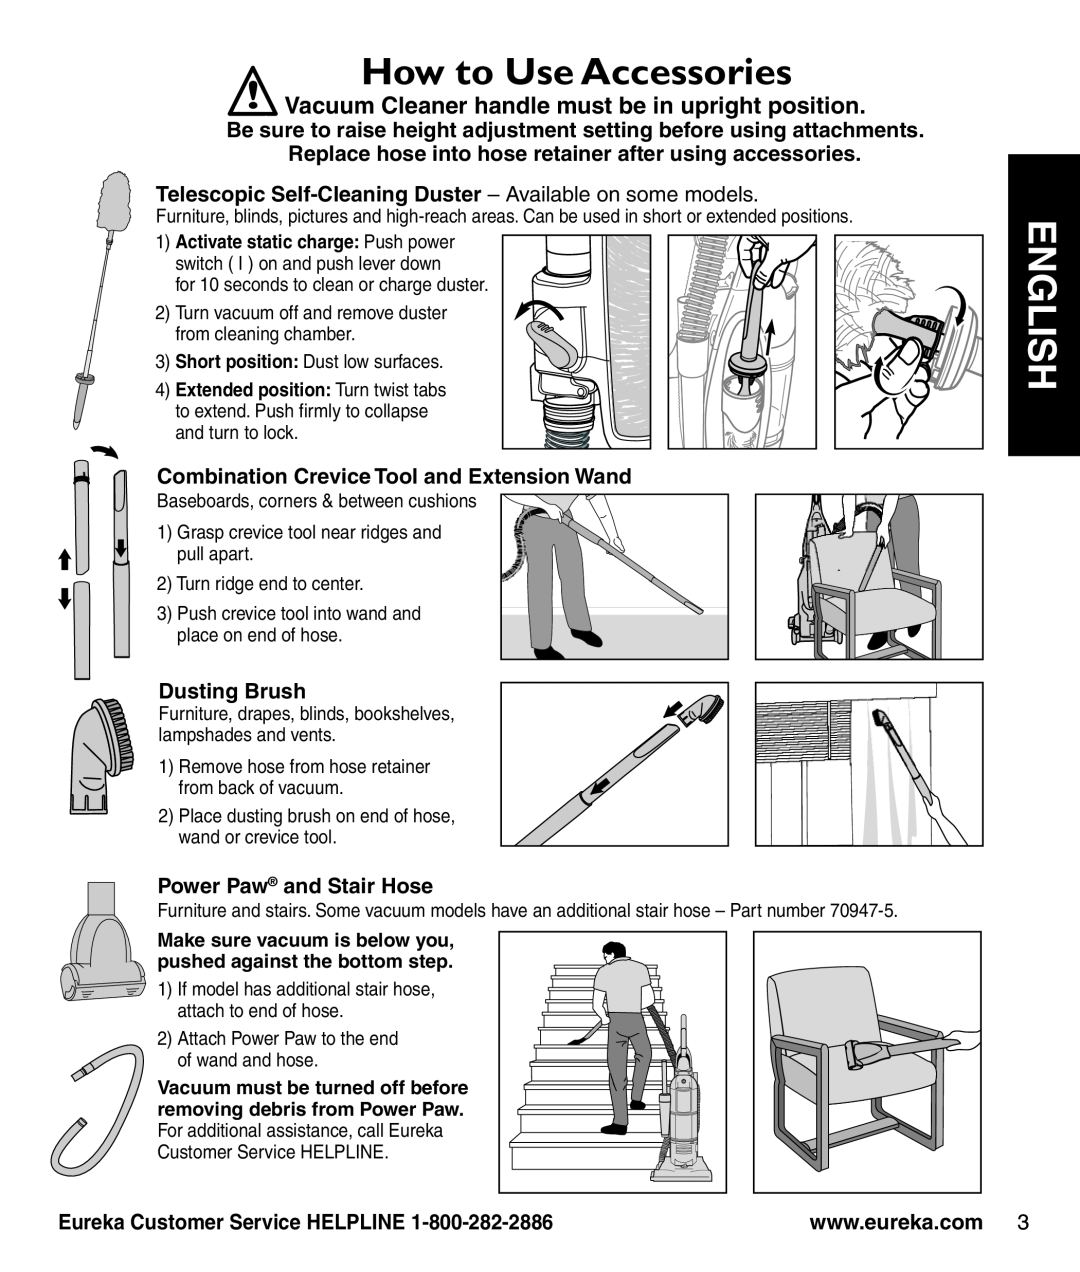 Eureka 2950-2996 Series How to Use Accessories, Vacuum Cleaner handle must be in upright position, Dusting Brush, English 